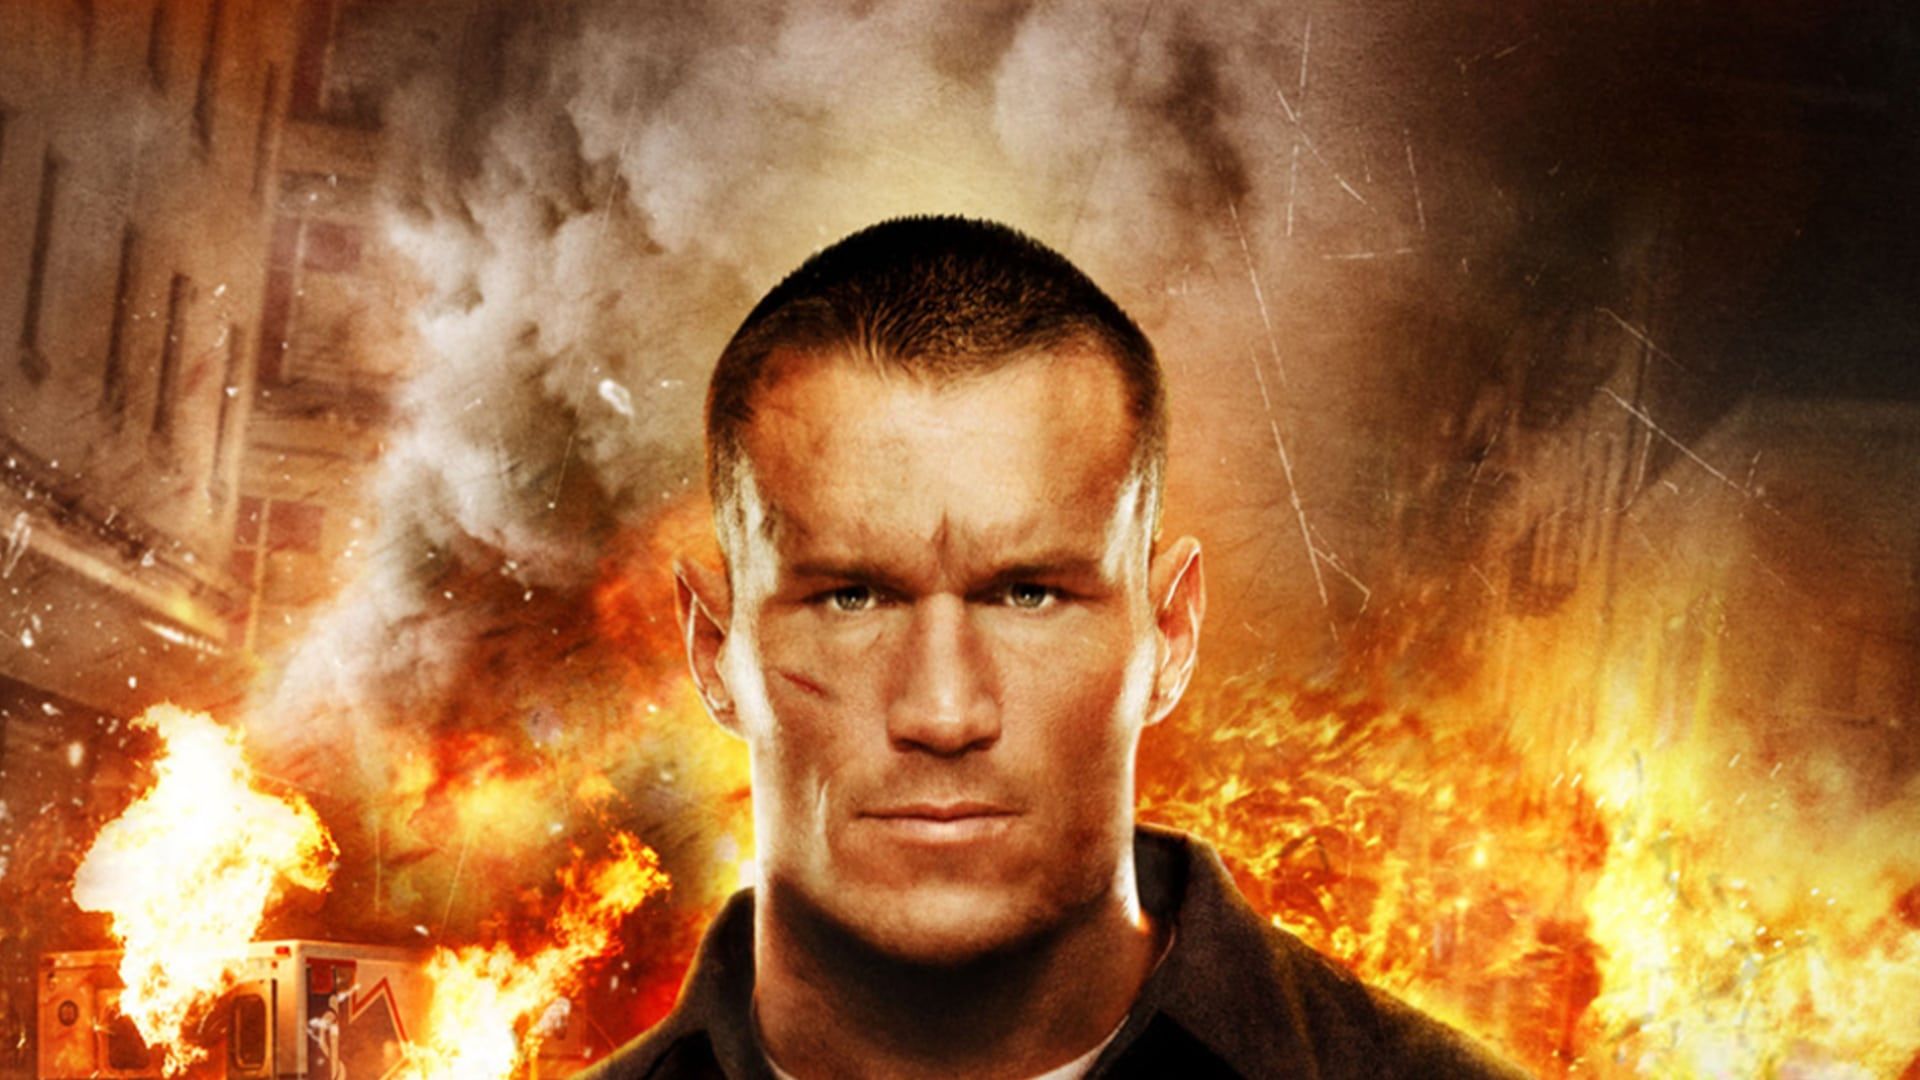 12 Rounds 2: Reloaded background